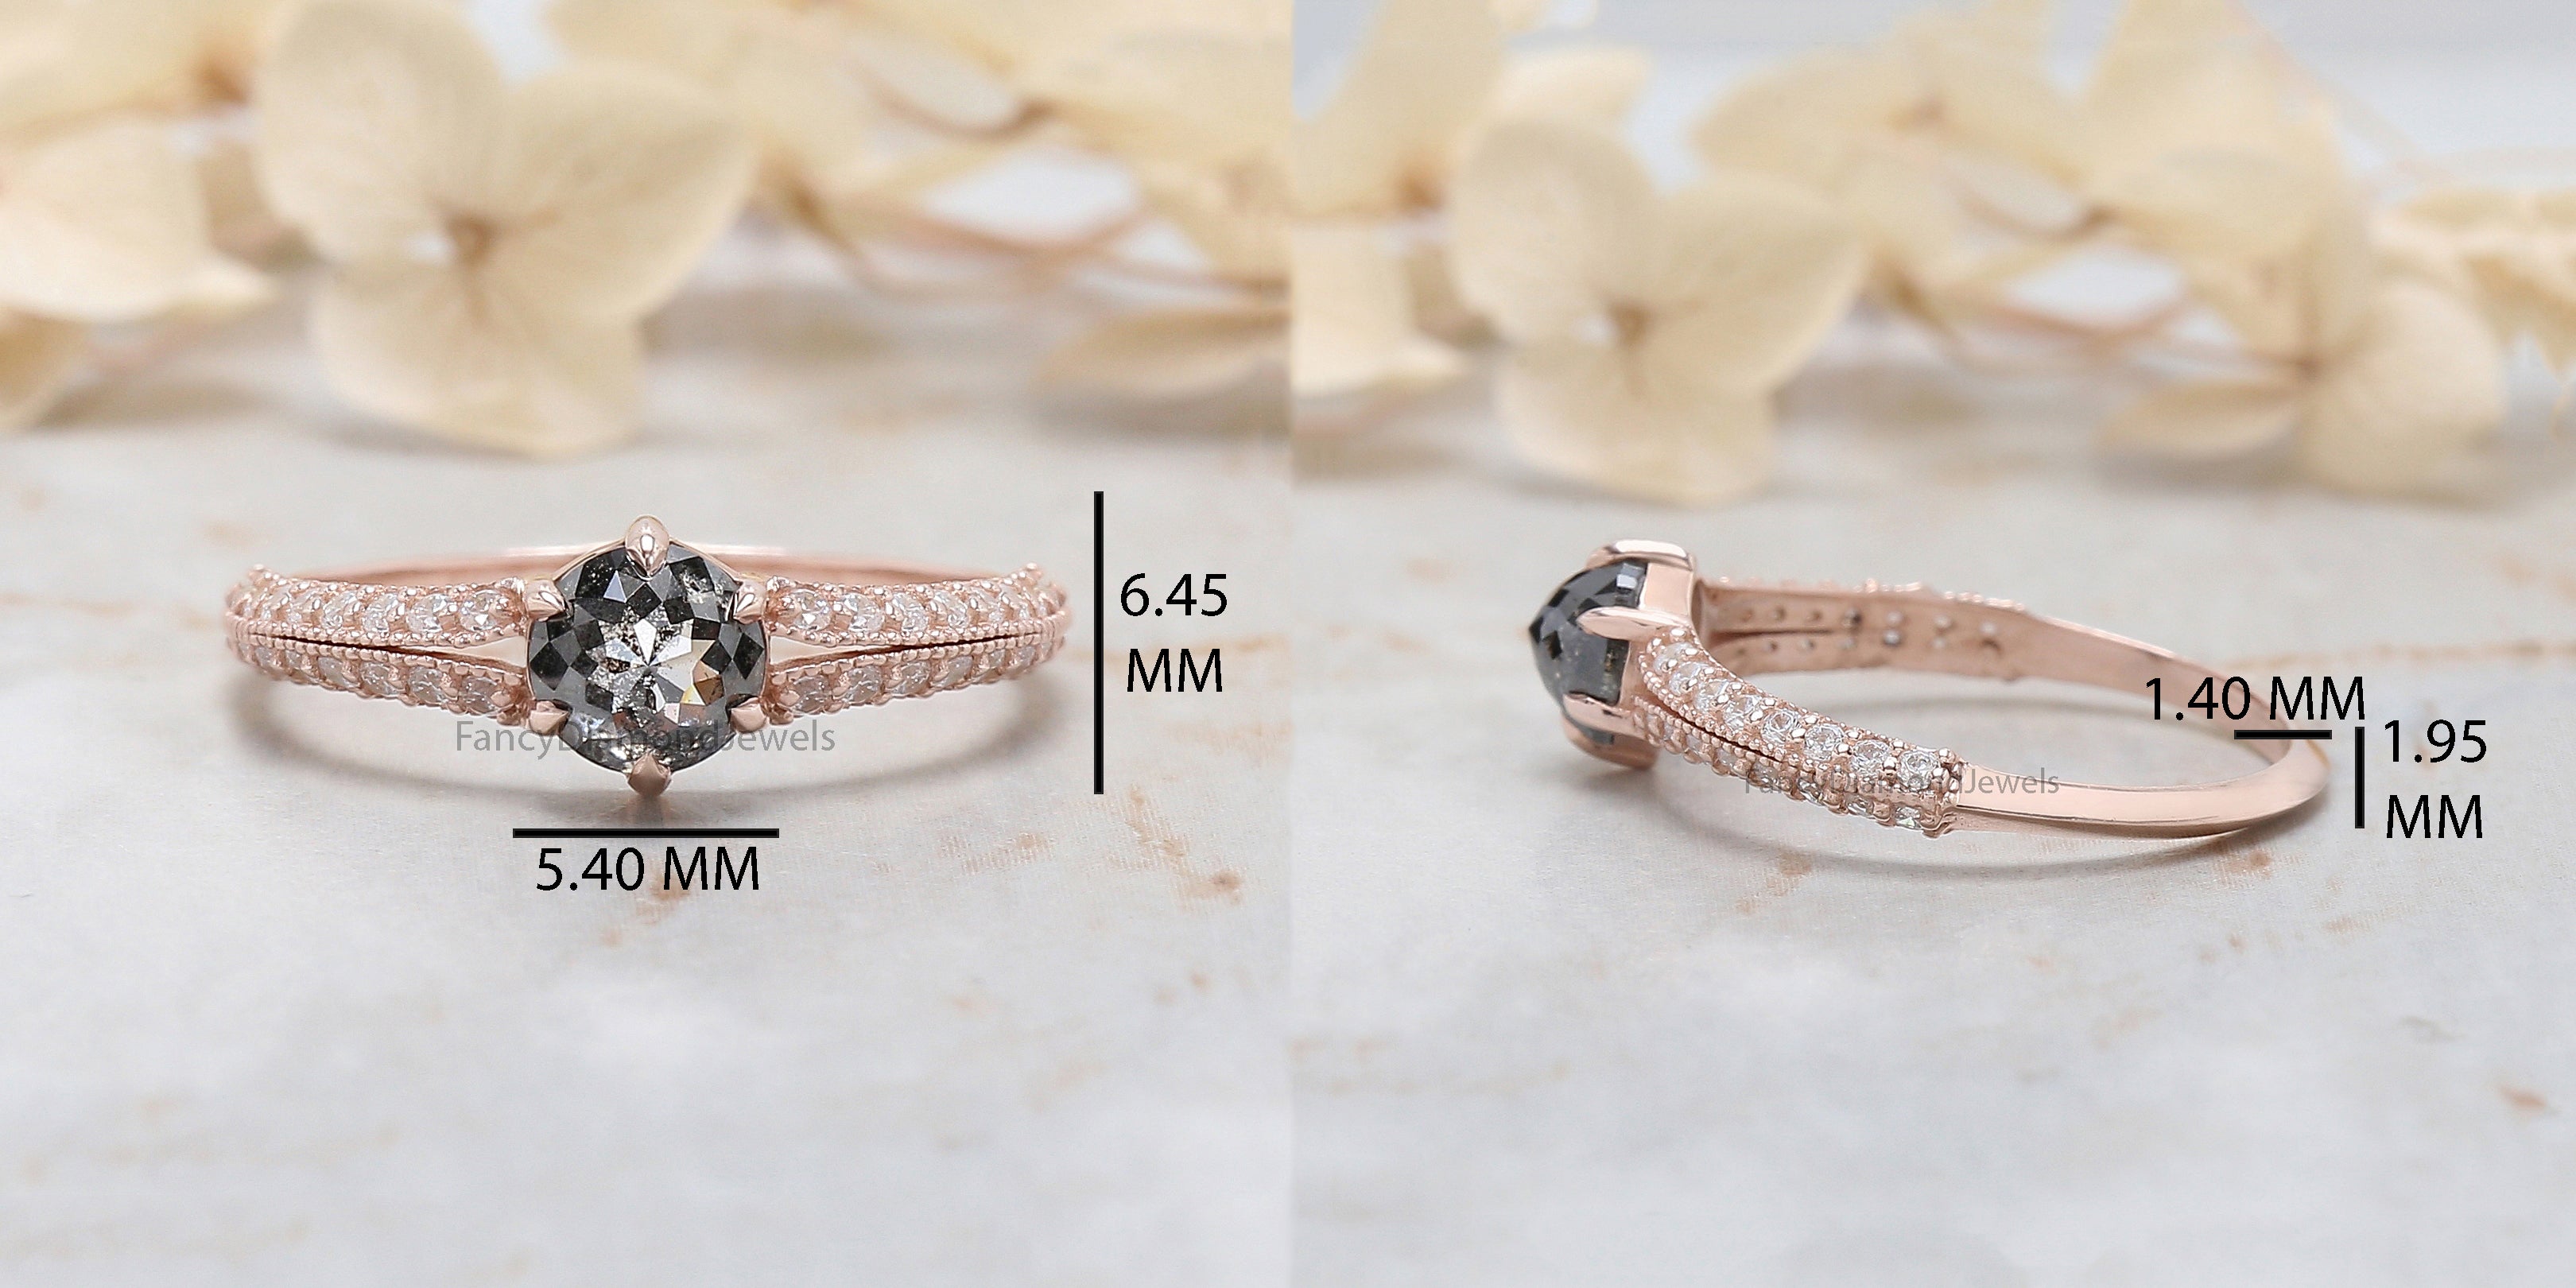 Round Rose Cut Salt And Pepper Diamond Ring 0.83 Ct 5.30 MM Round Diamond Ring 14K Rose Gold Silver Engagement Ring Gift For Her QN9672